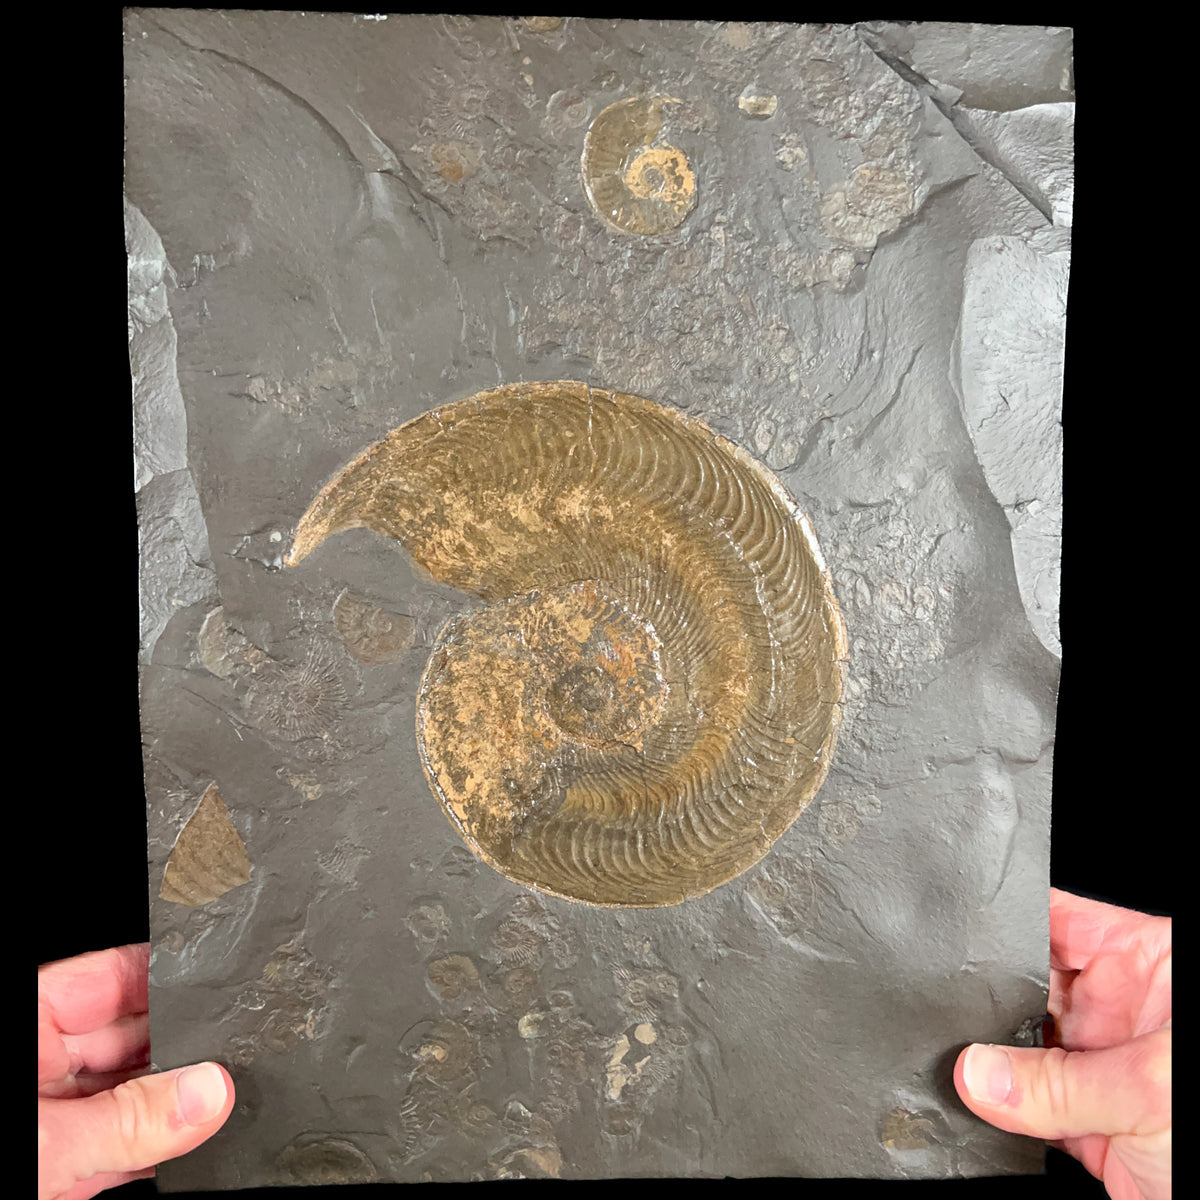 Large Harpoceras Ammonite and Dactyliocerasa Fossil Plate